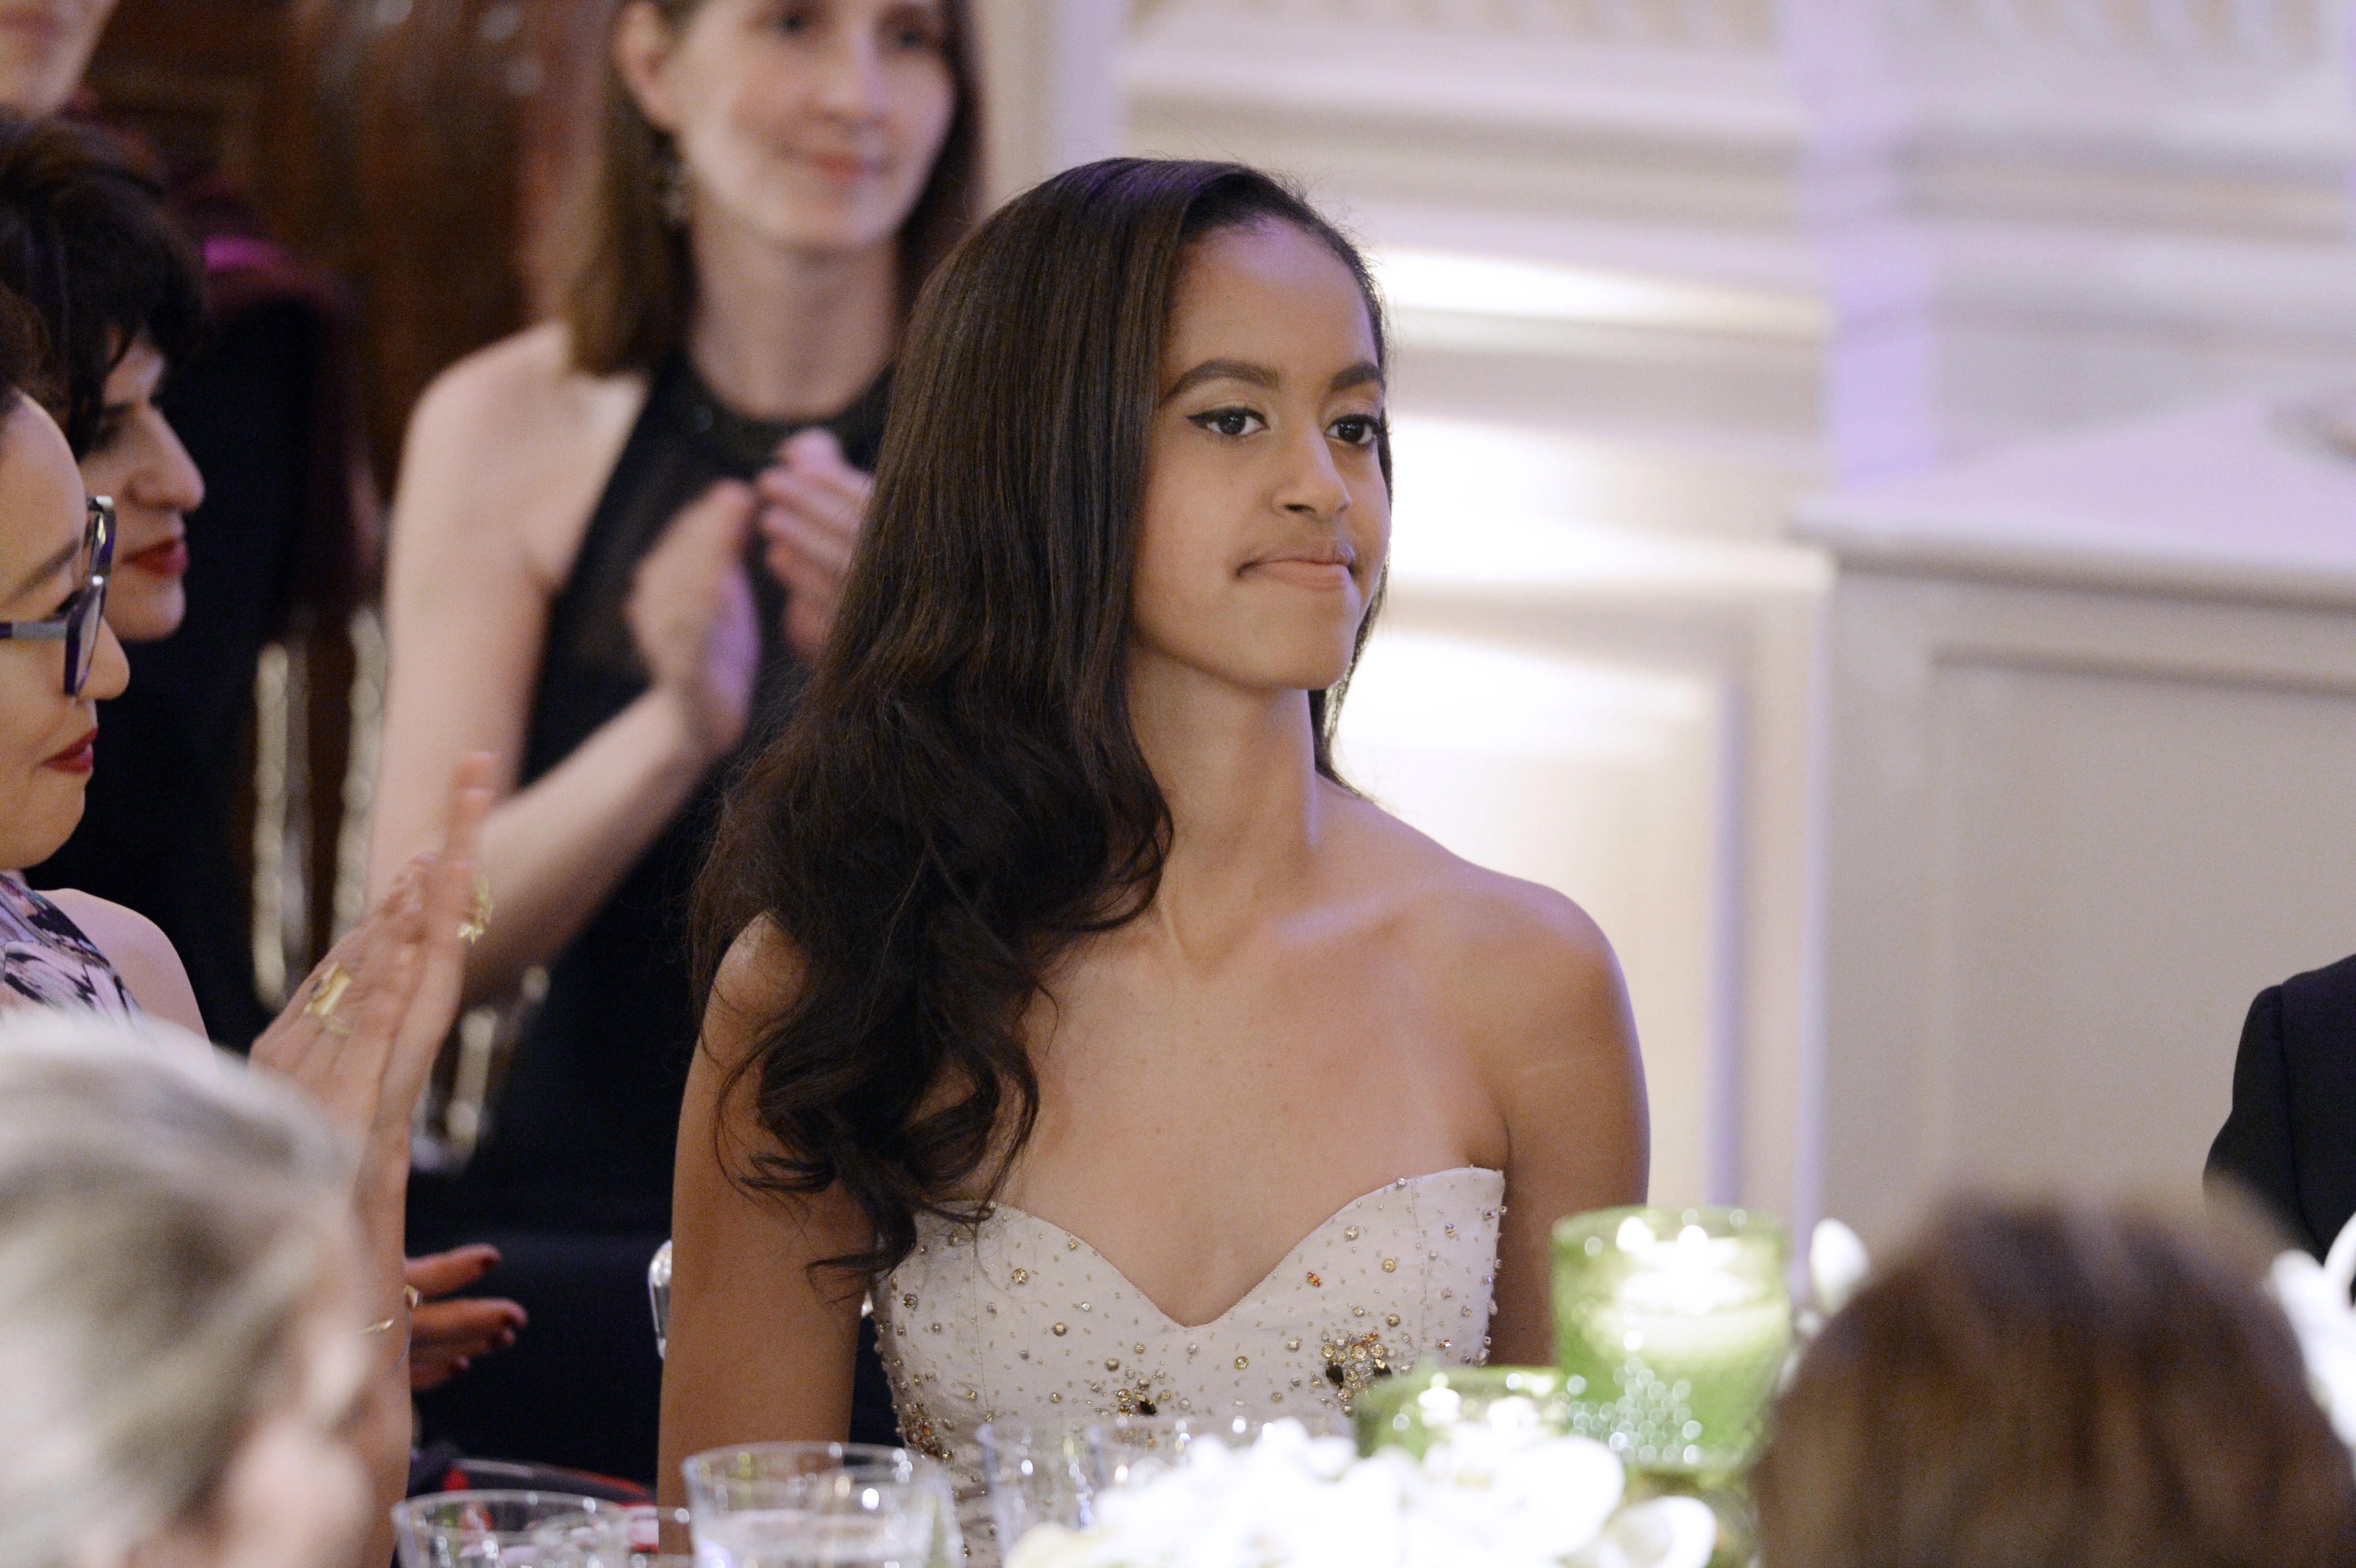 Malia Obama at a White House State Dinner on Mar. 10, 2016 in Washington, D.C. | Photo: Getty Images